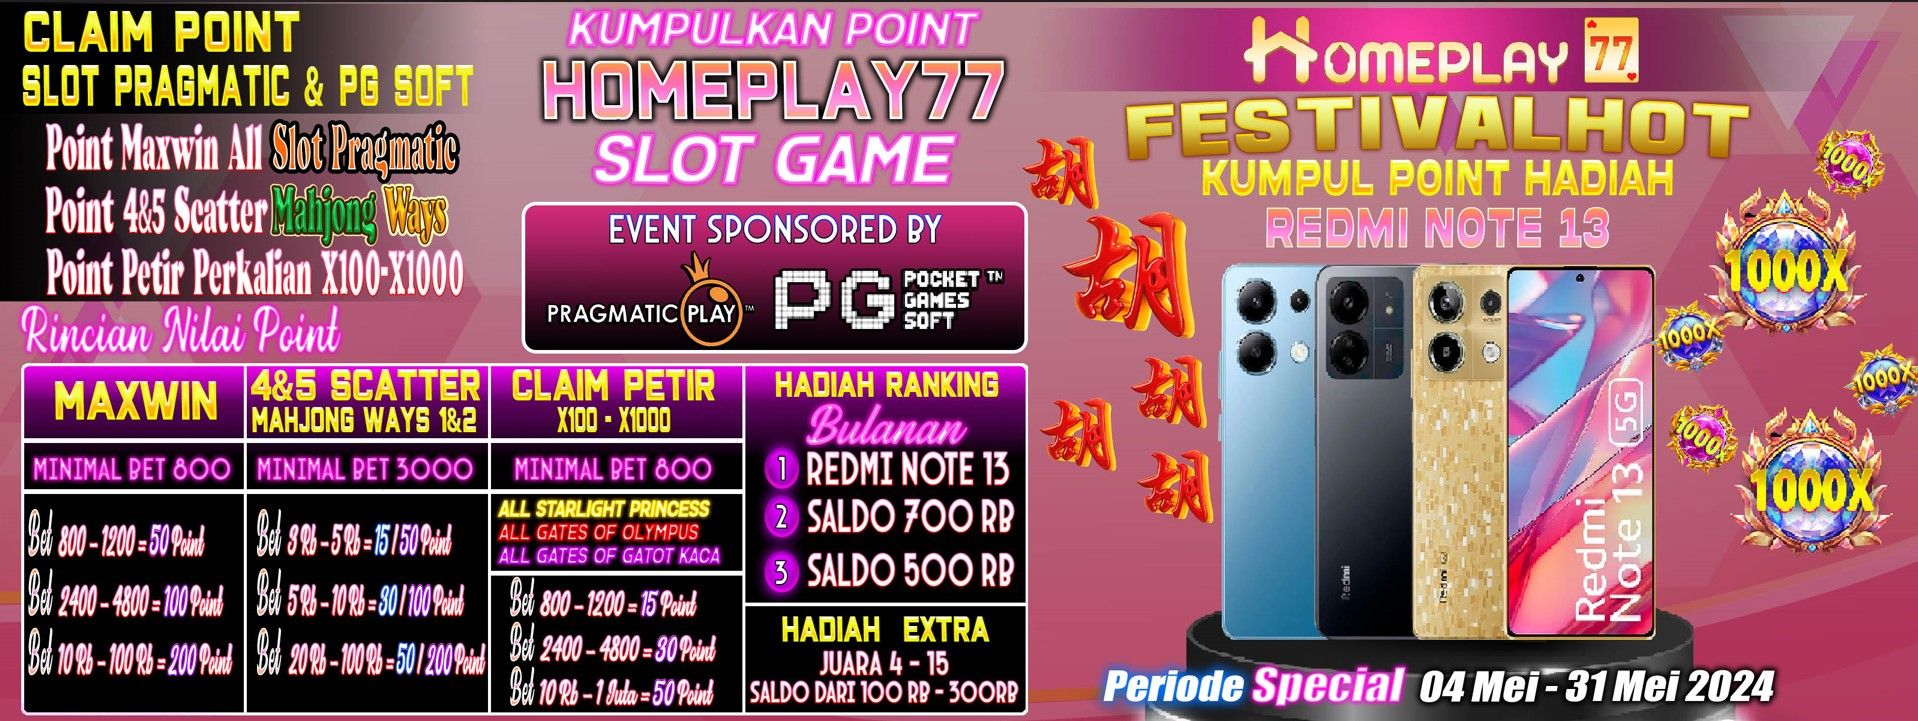 SPECIAL EVENT CLAIM POINT HOMEPLAY77